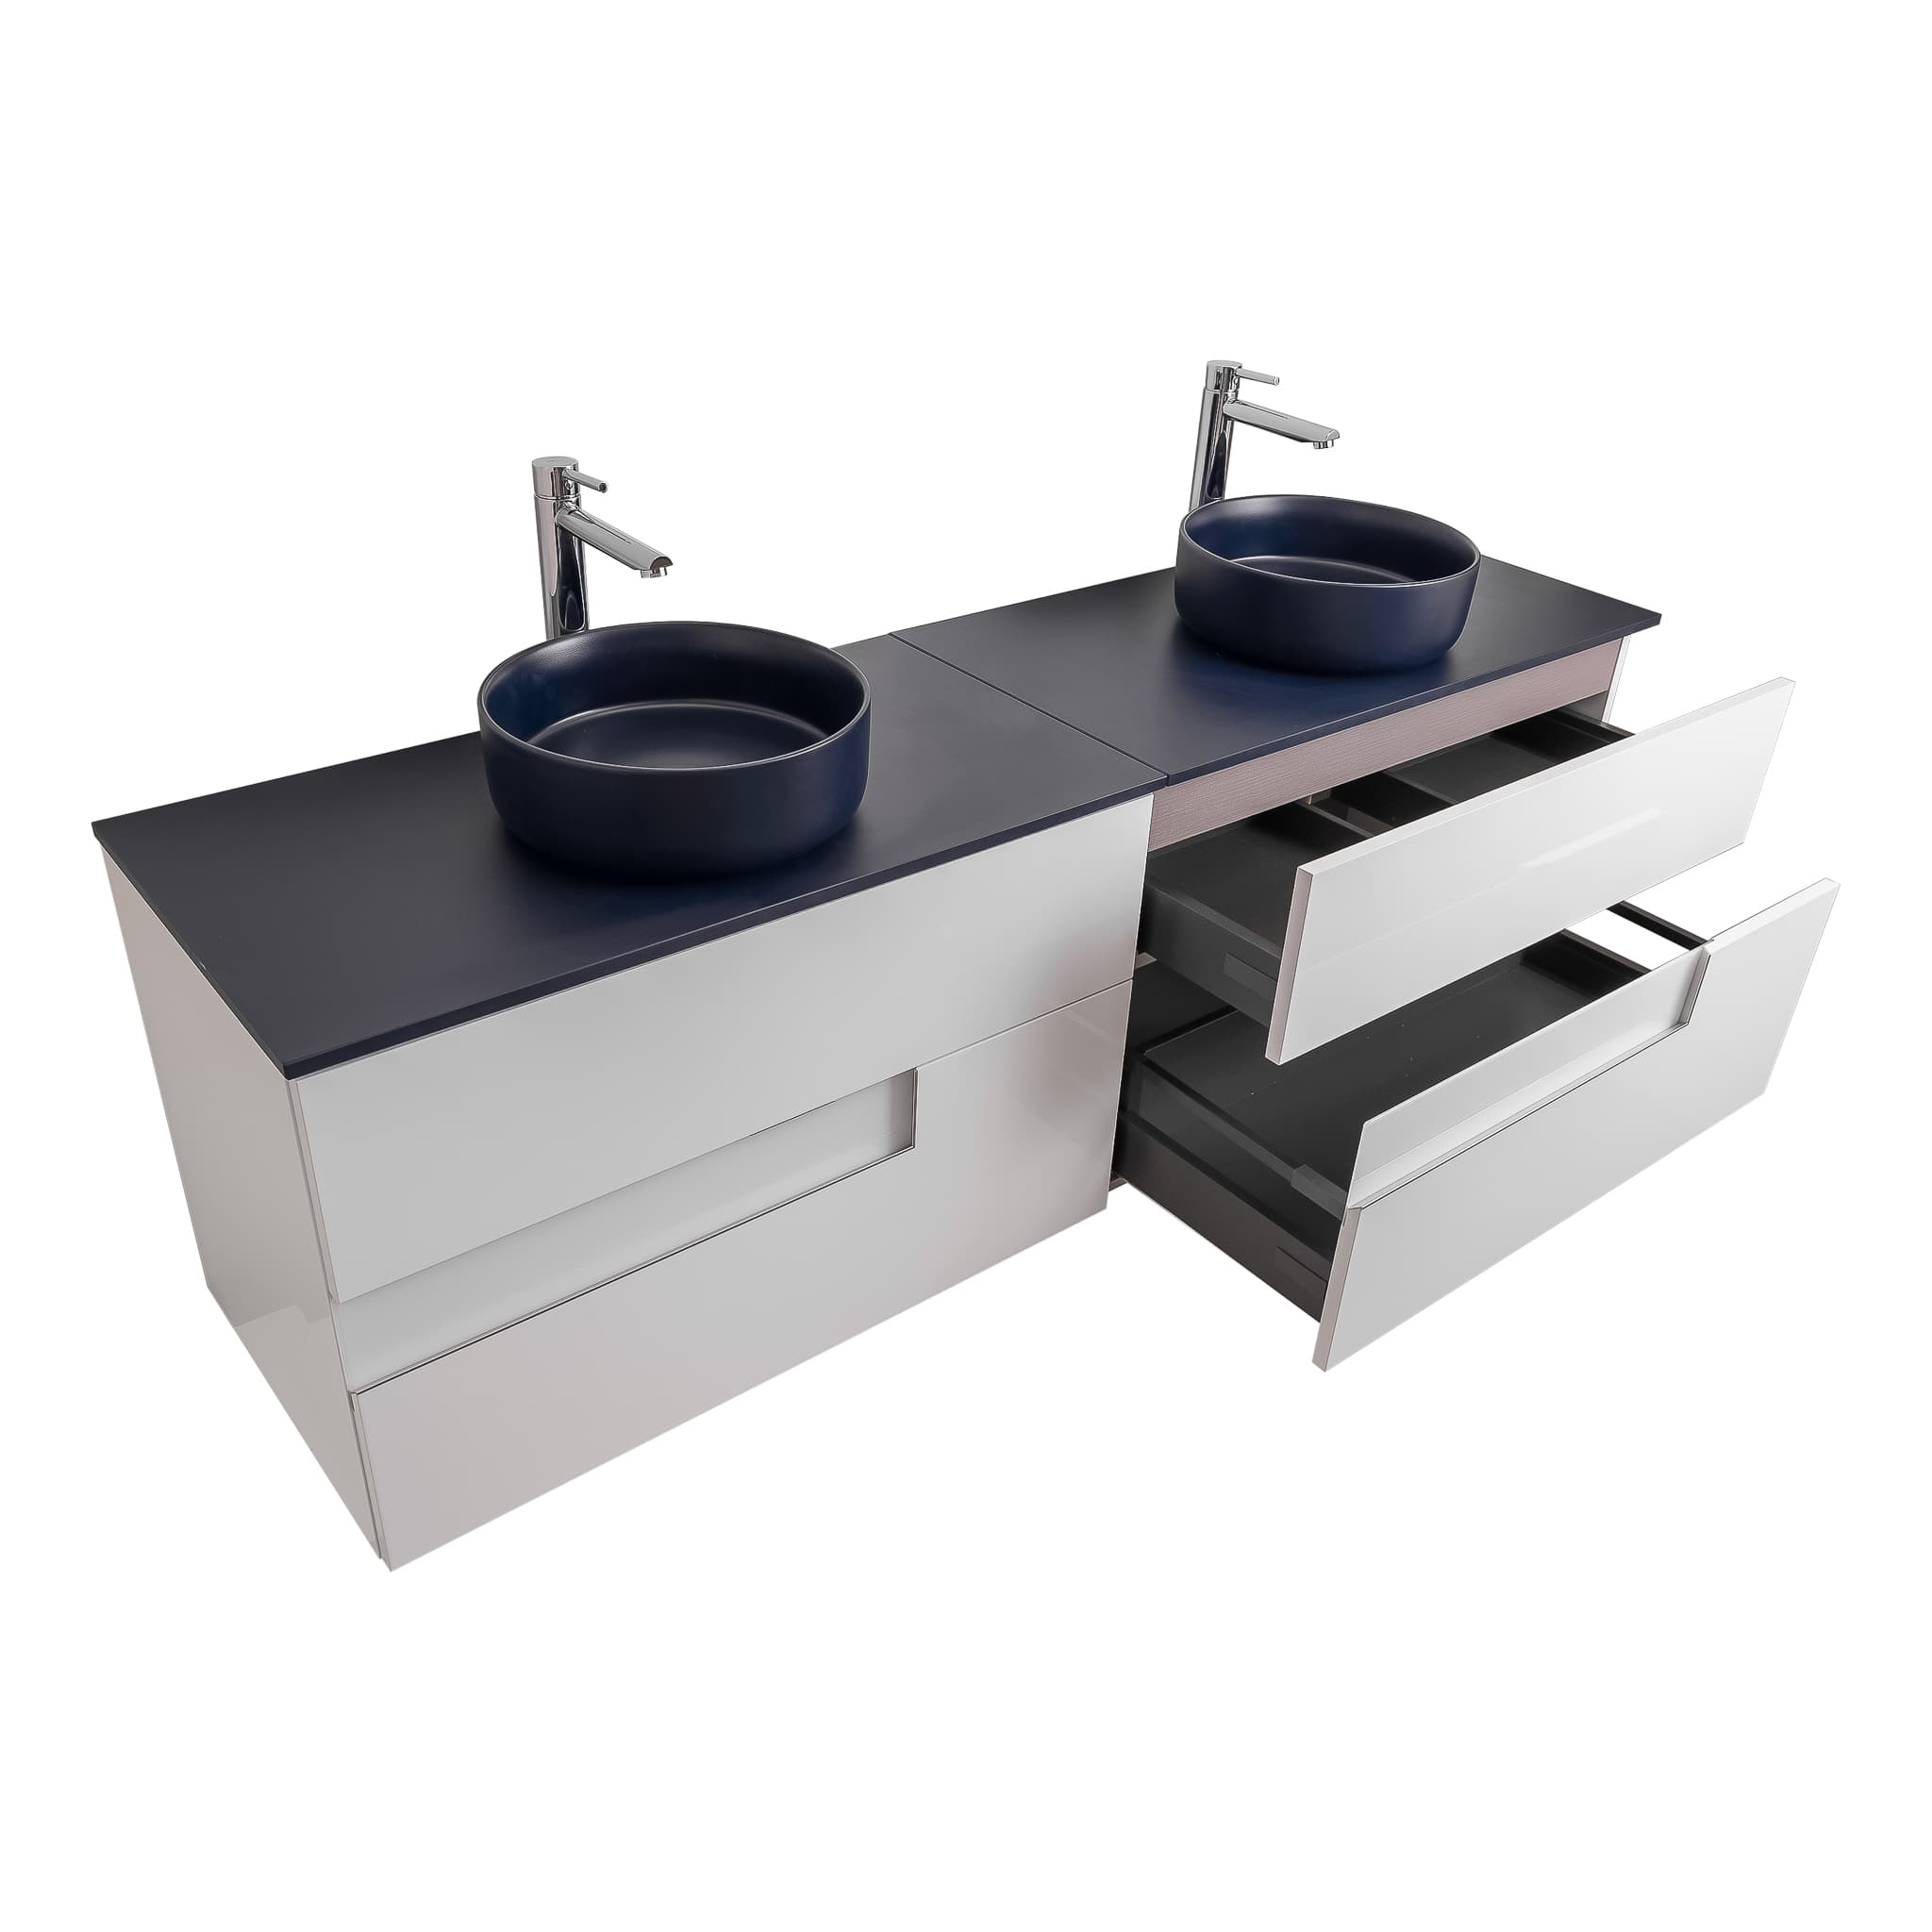 Vision 72 White High Gloss Cabinet, Ares Navy Blue Top And Two Ares Navy Blue Ceramic Basin, Wall Mounted Modern Vanity Set